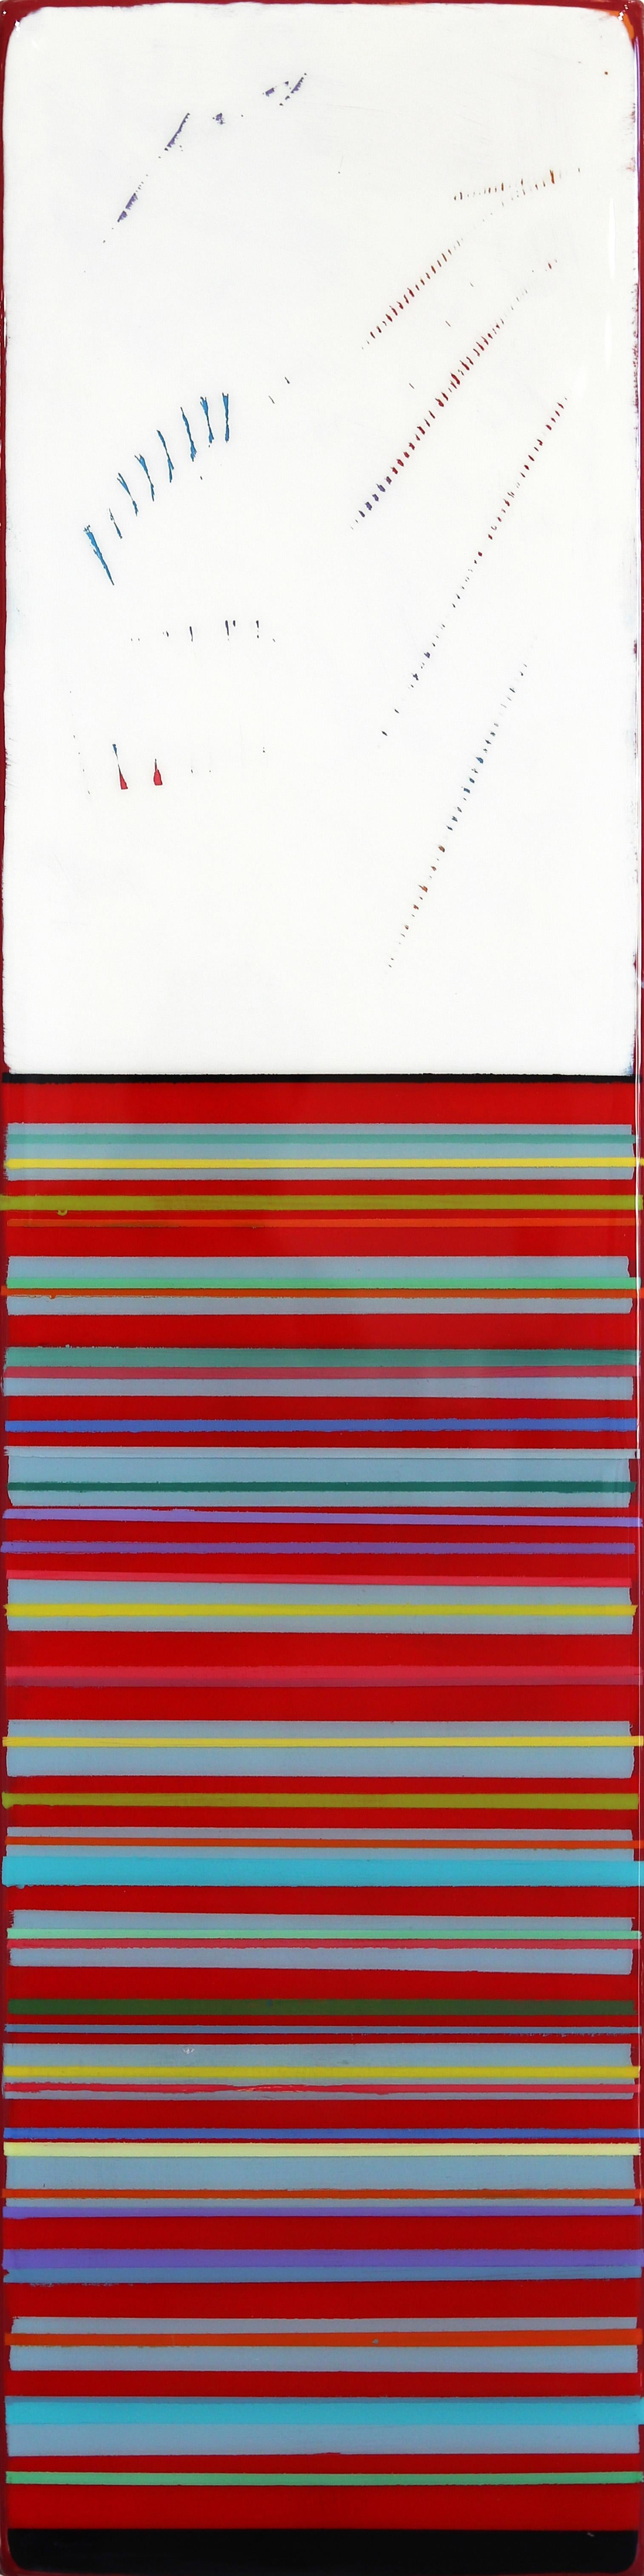 Sunspot 93  -  Modern Minimalist Colorful Stripes Tall Abstract Resin Artwork - Mixed Media Art by Ricky Hunt